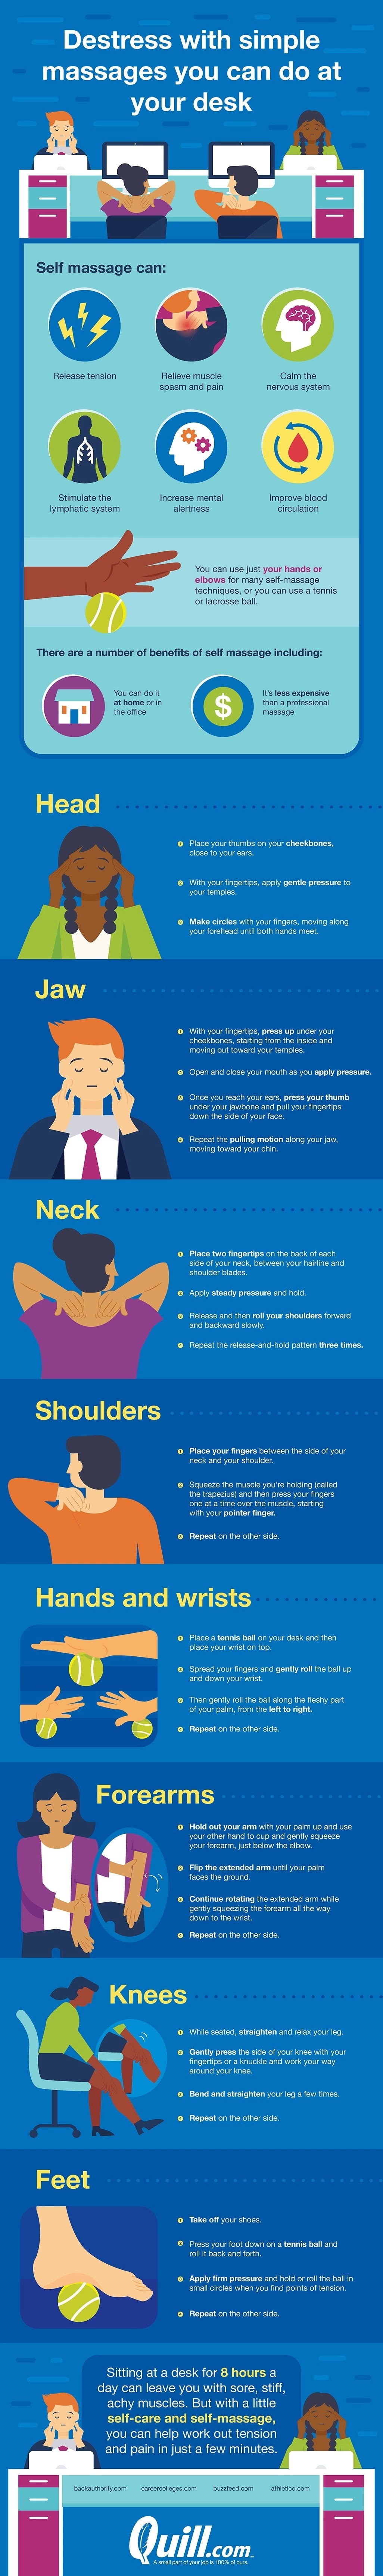 Destress with Simple Massages You Can Do at Your Desk